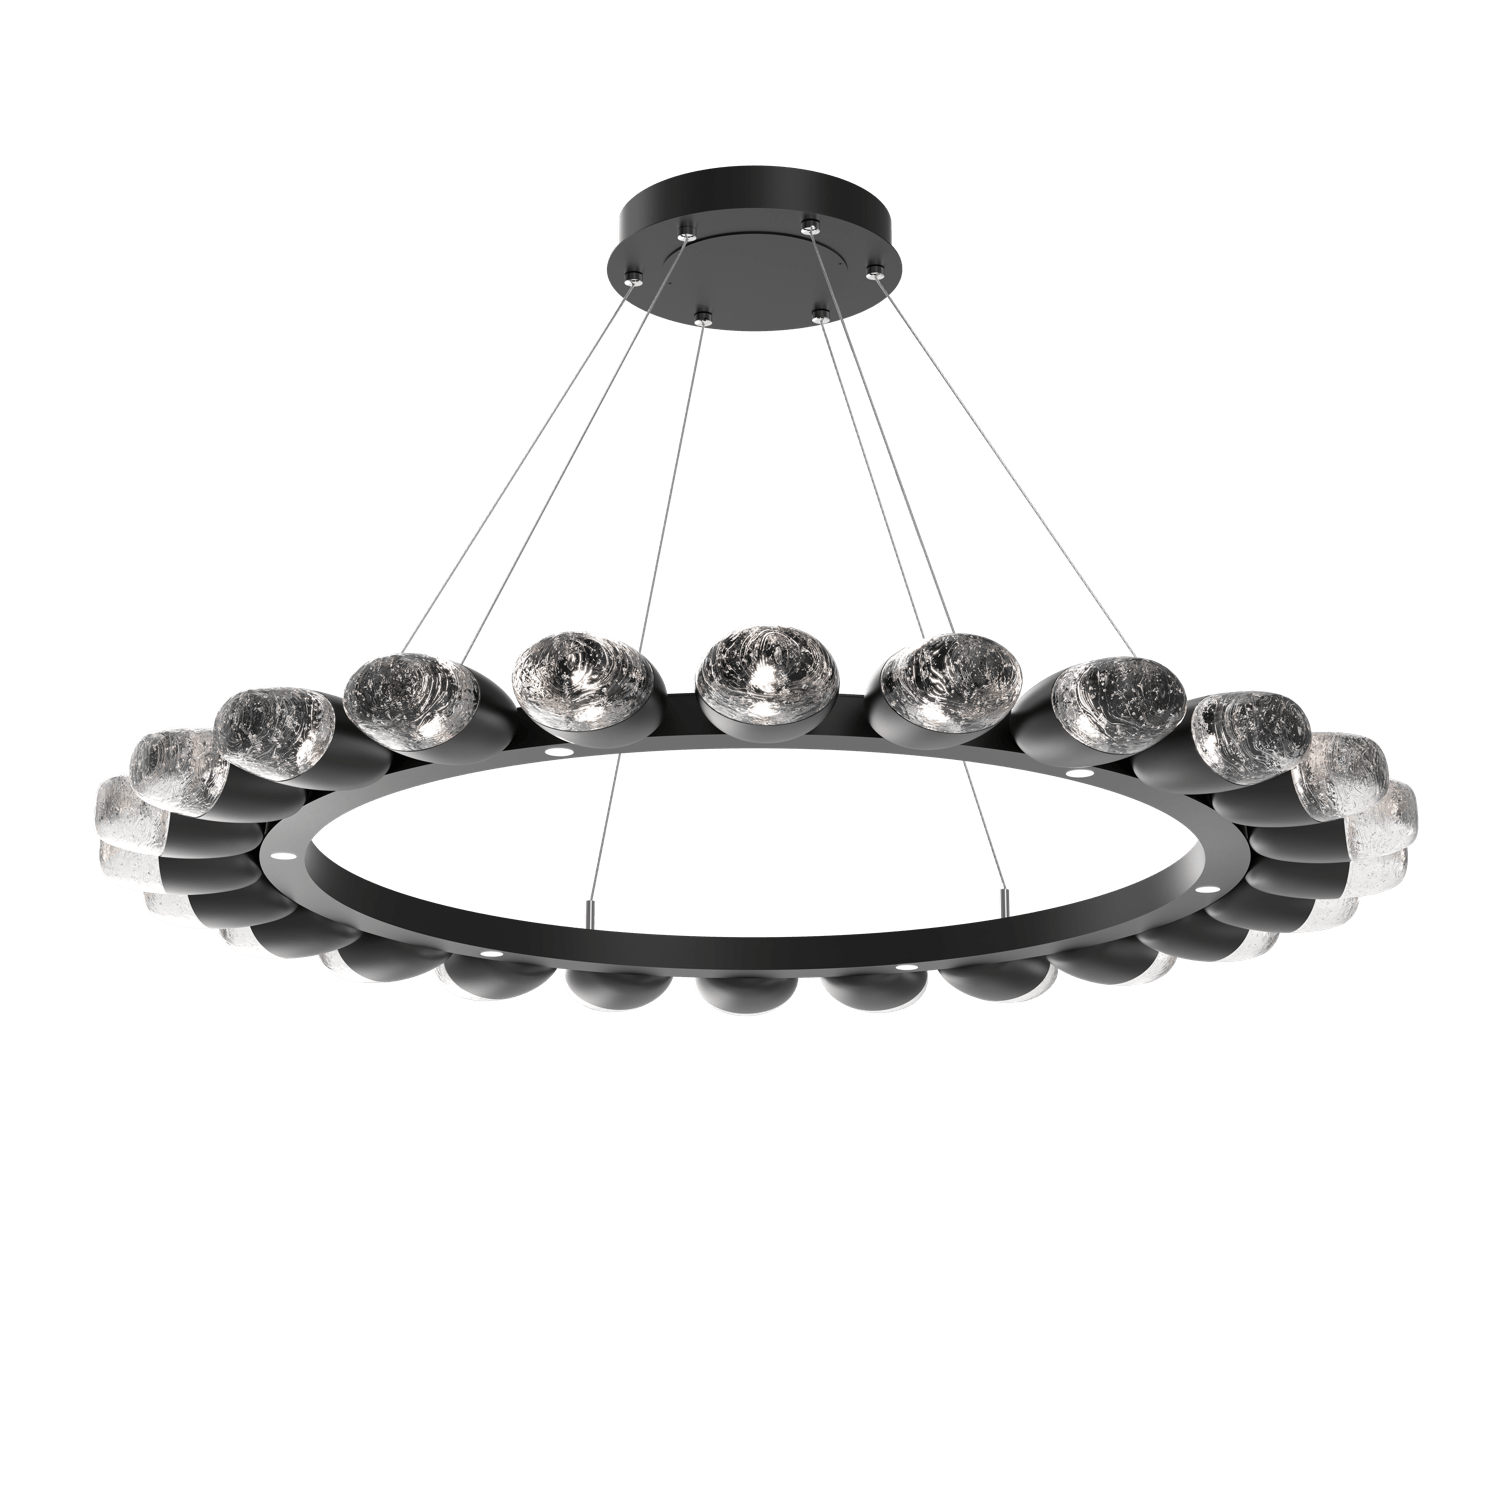 CHB0079-48-MB-Hammerton-Studio-Pebble-48-inch-radial-ring-chandelier-with-matte-black-finish-and-clear-cast-glass-shades-and-LED-lamping